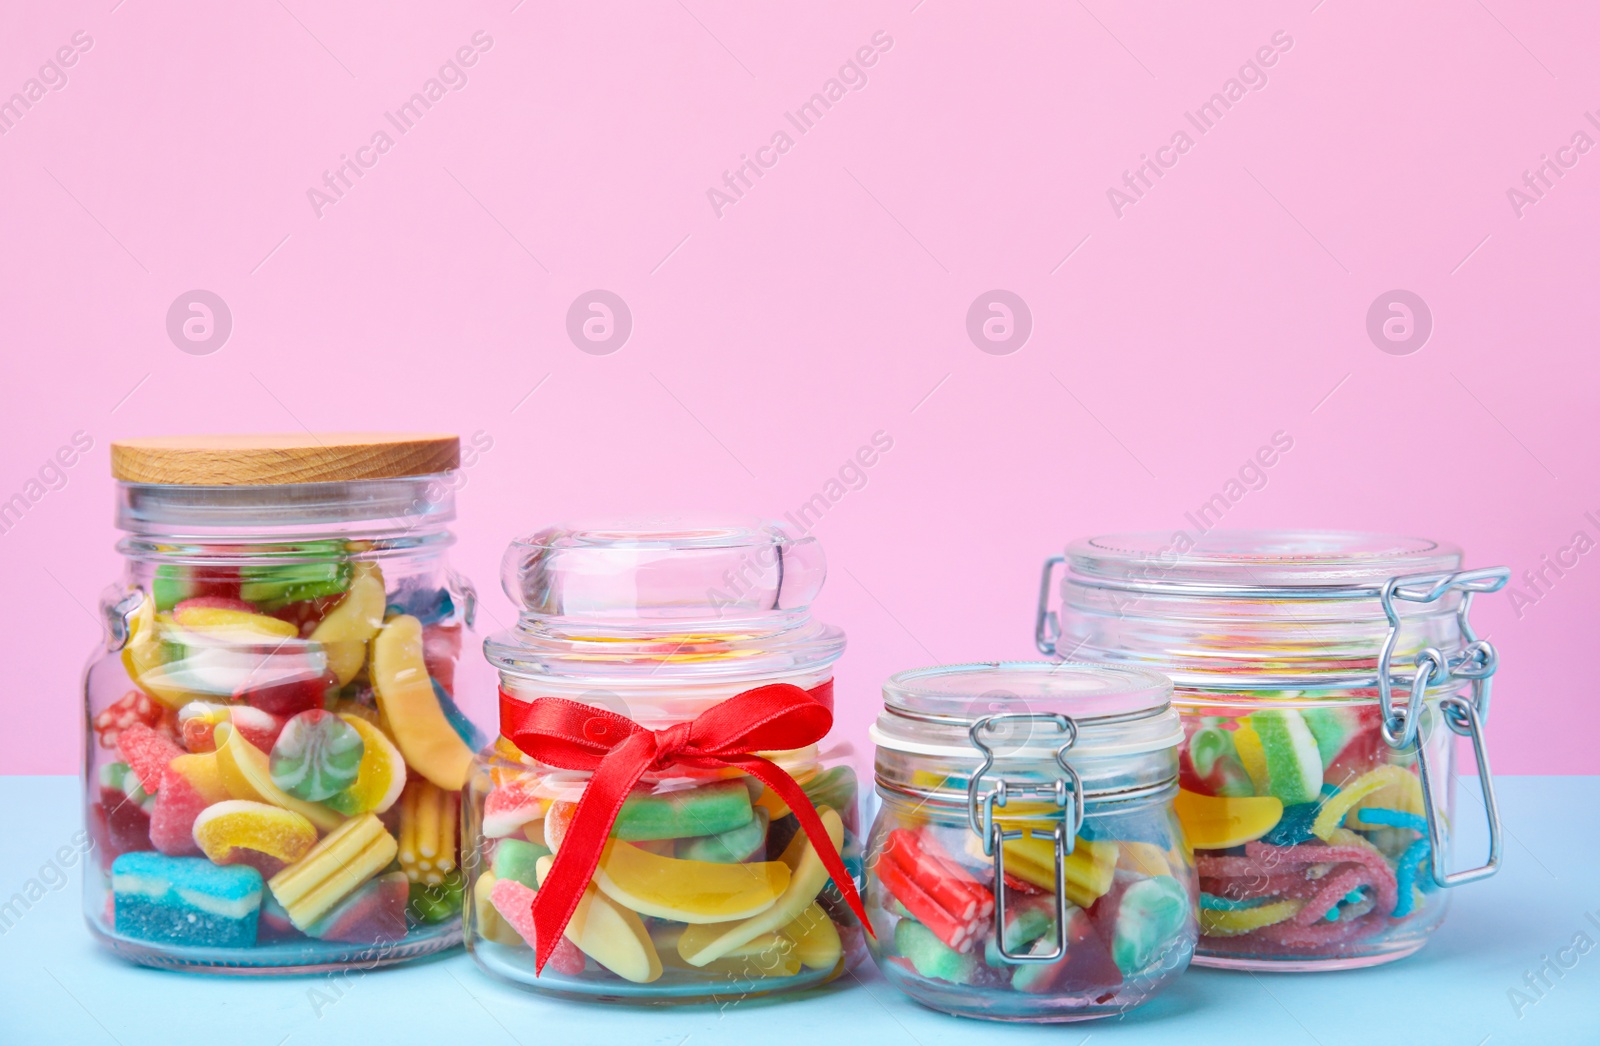 Photo of Tasty colorful jelly candies in glass jars on light blue table against pink background